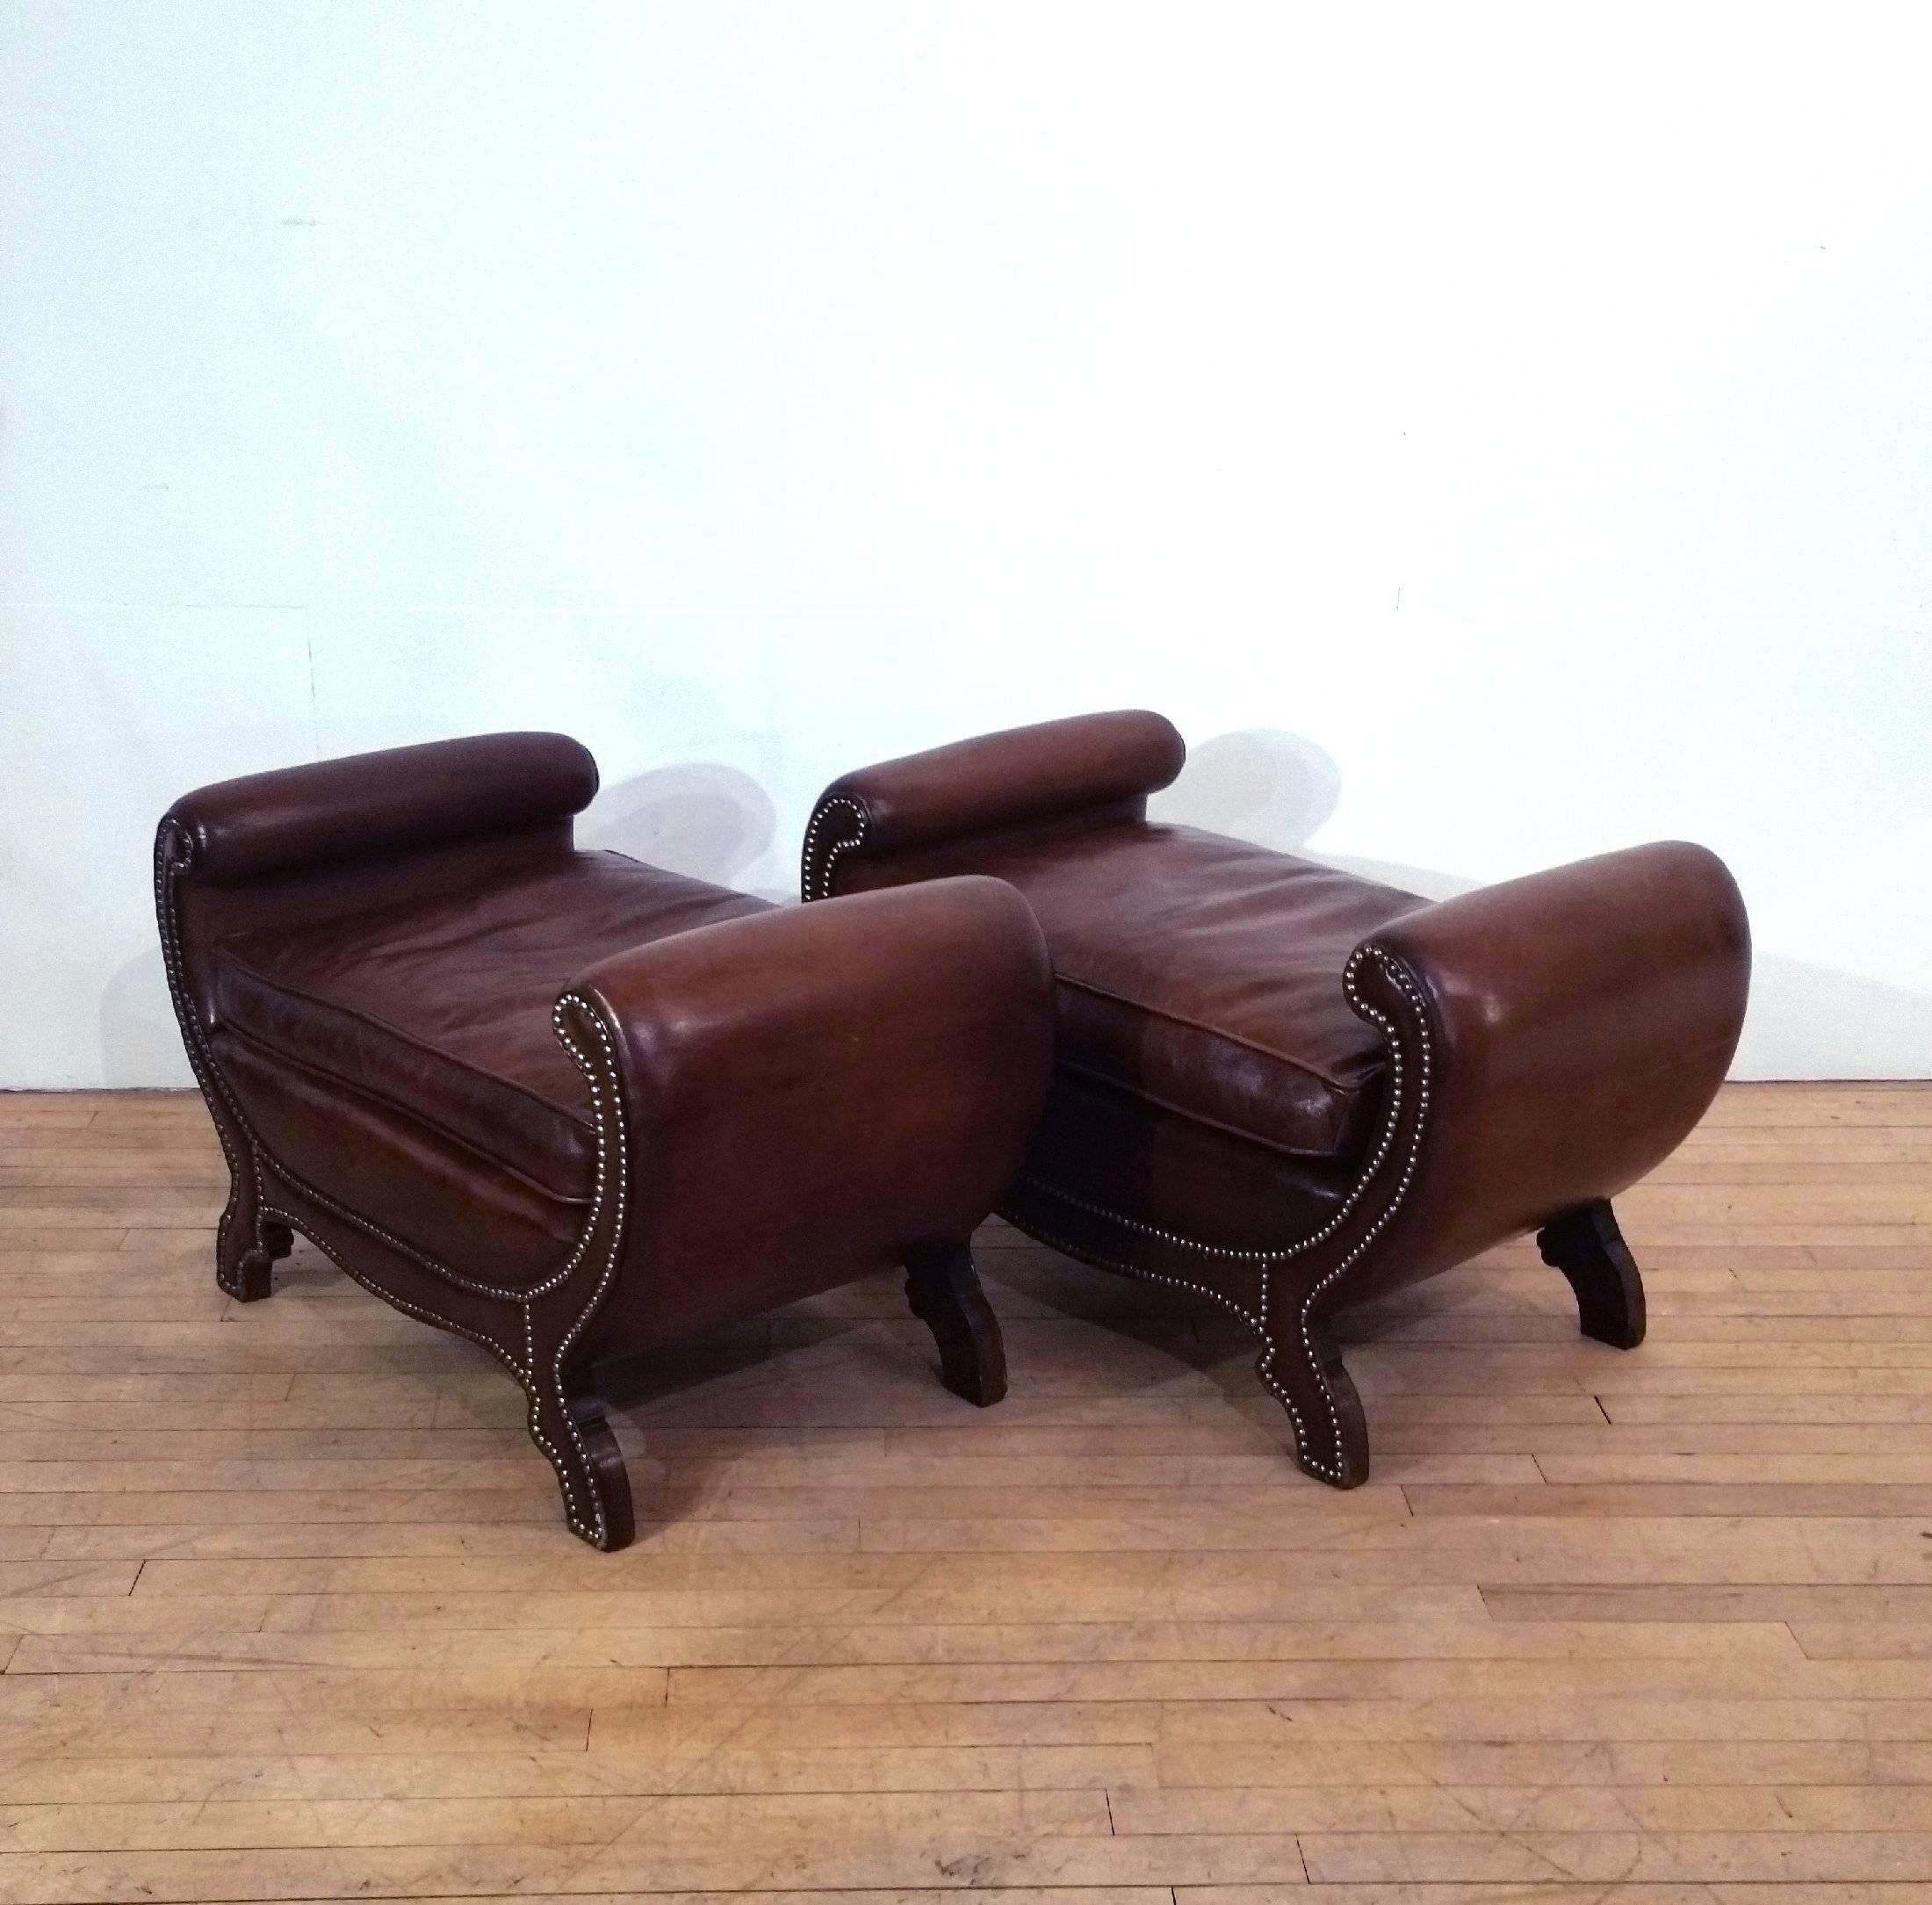 This very attractive and versatile pair of window seats has been upholstered in rich warm Cognac brown leather with metal stud detailing. They were designed in the Regency style and feature curled arm supports and a separate seat cushion. Each seat